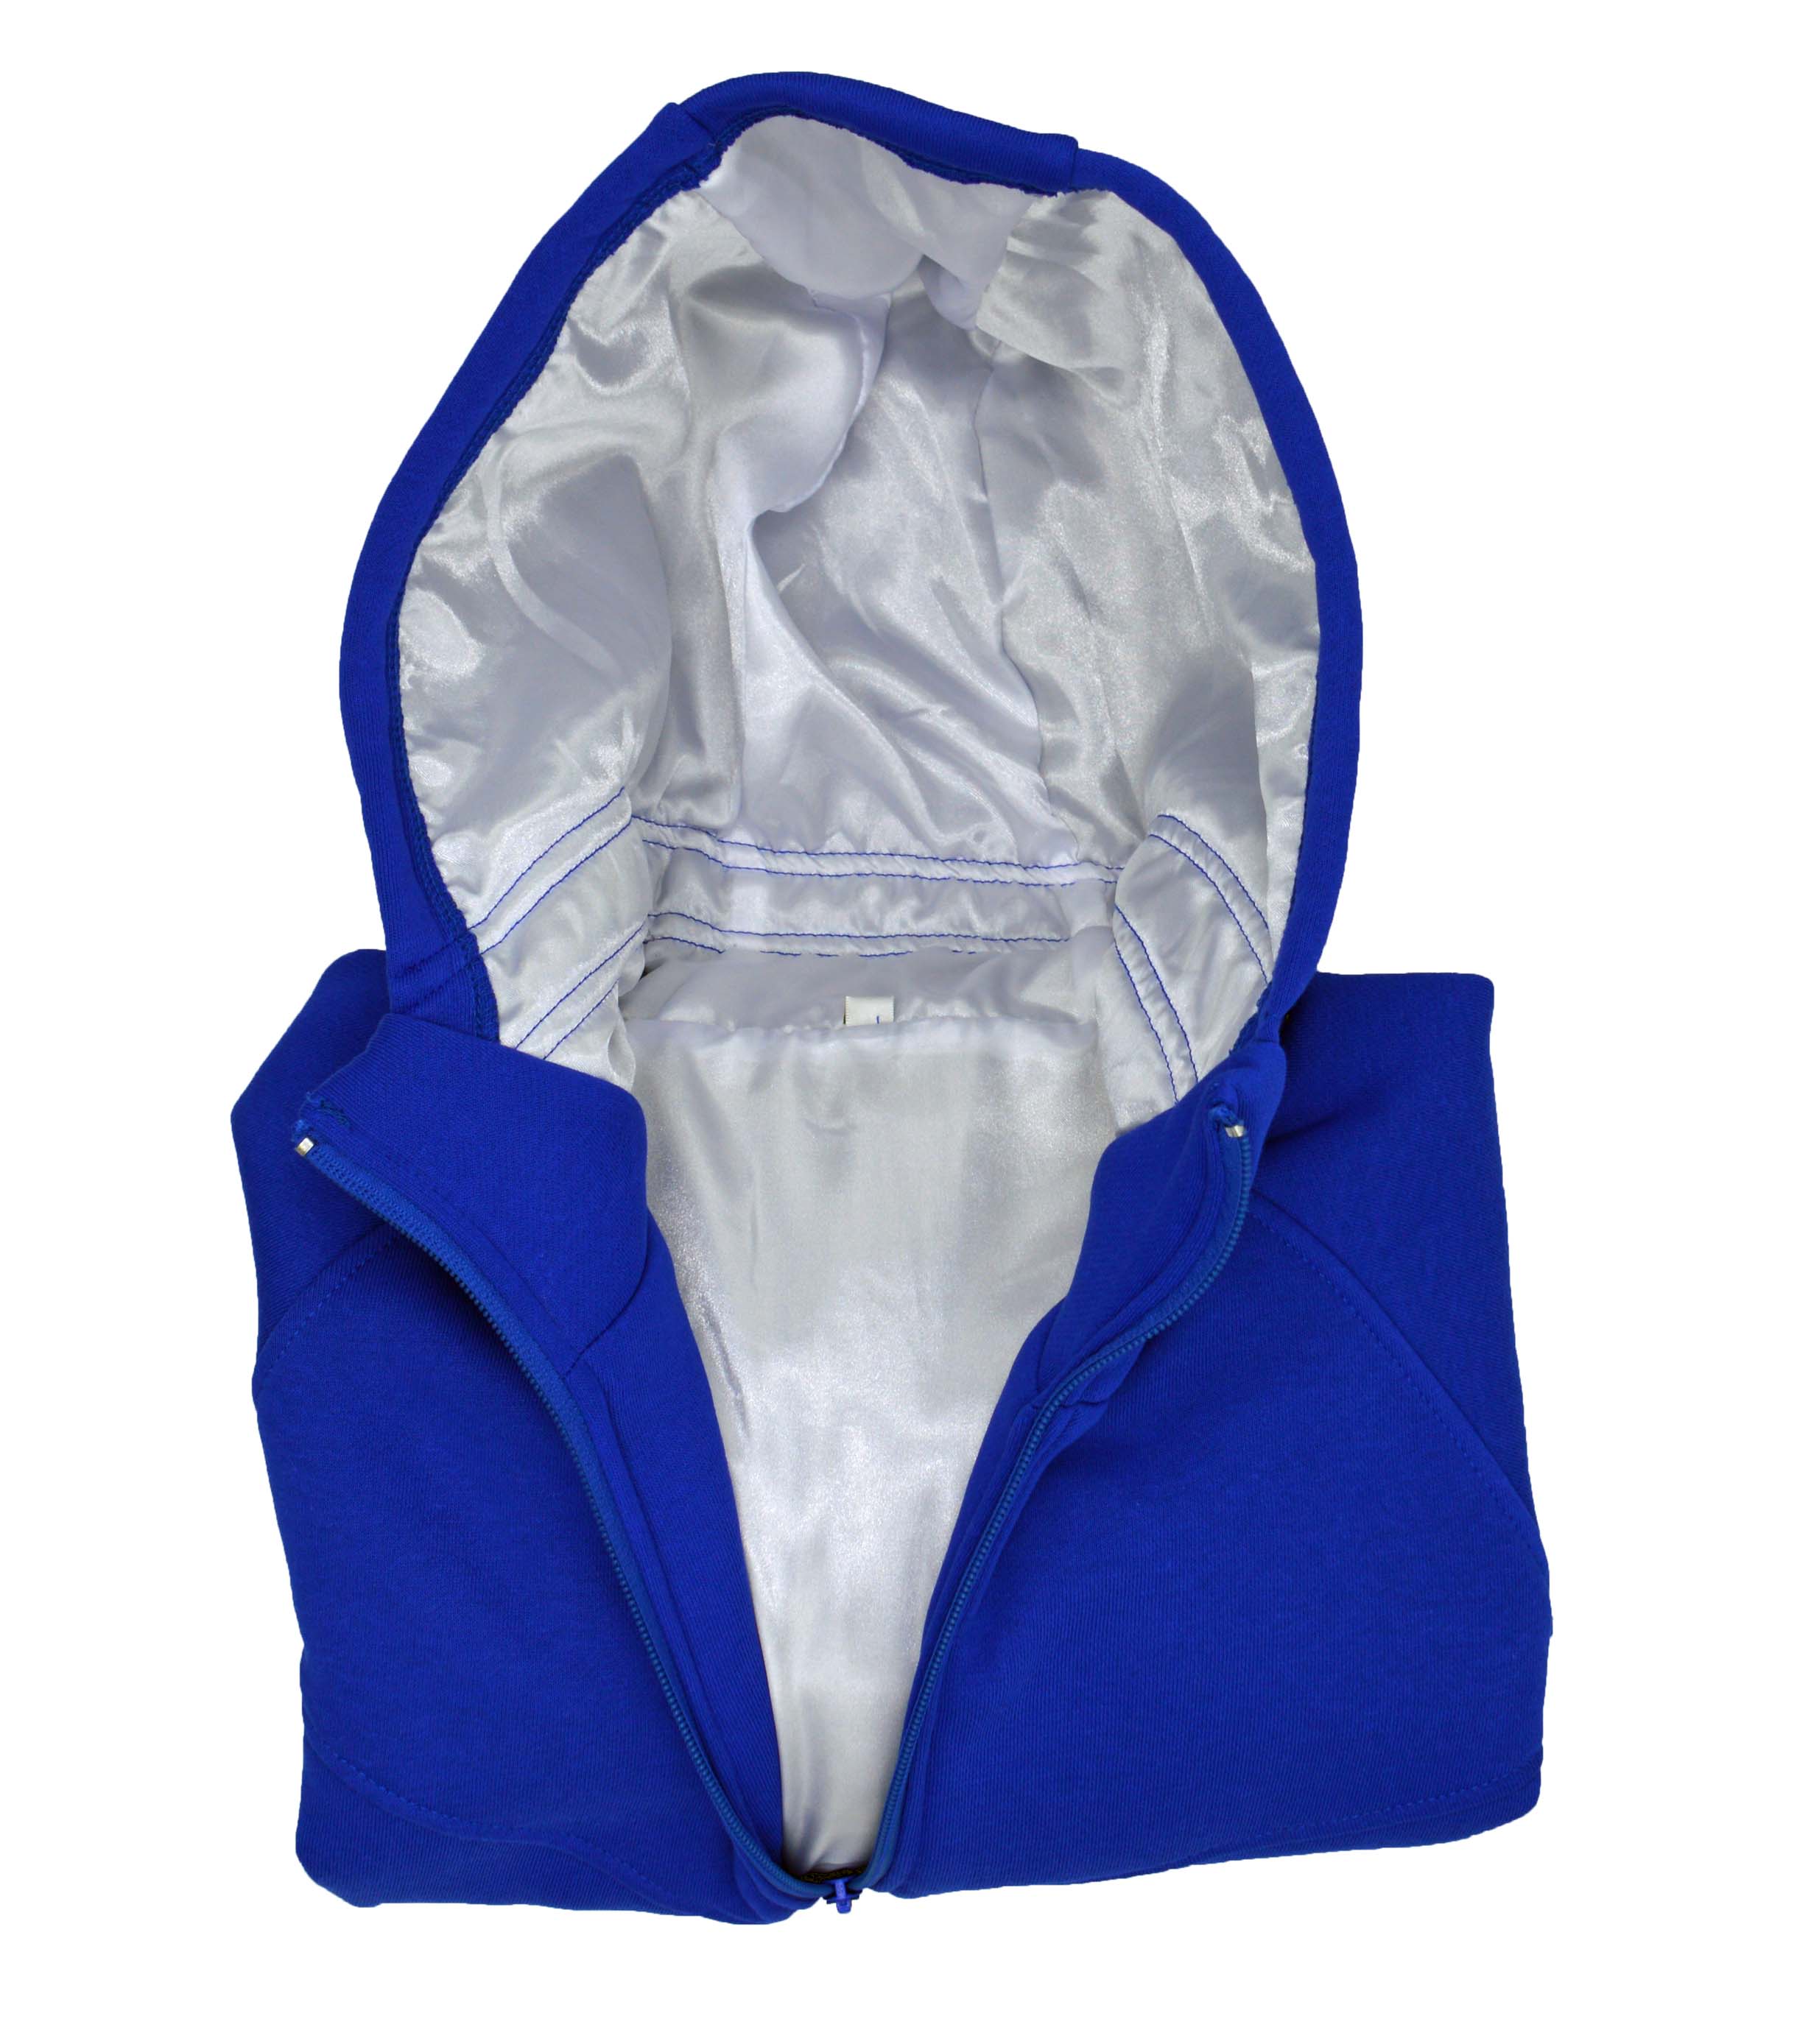 Women’s Satin Lined Hoodie (Royal Blue and Pure White Satin)